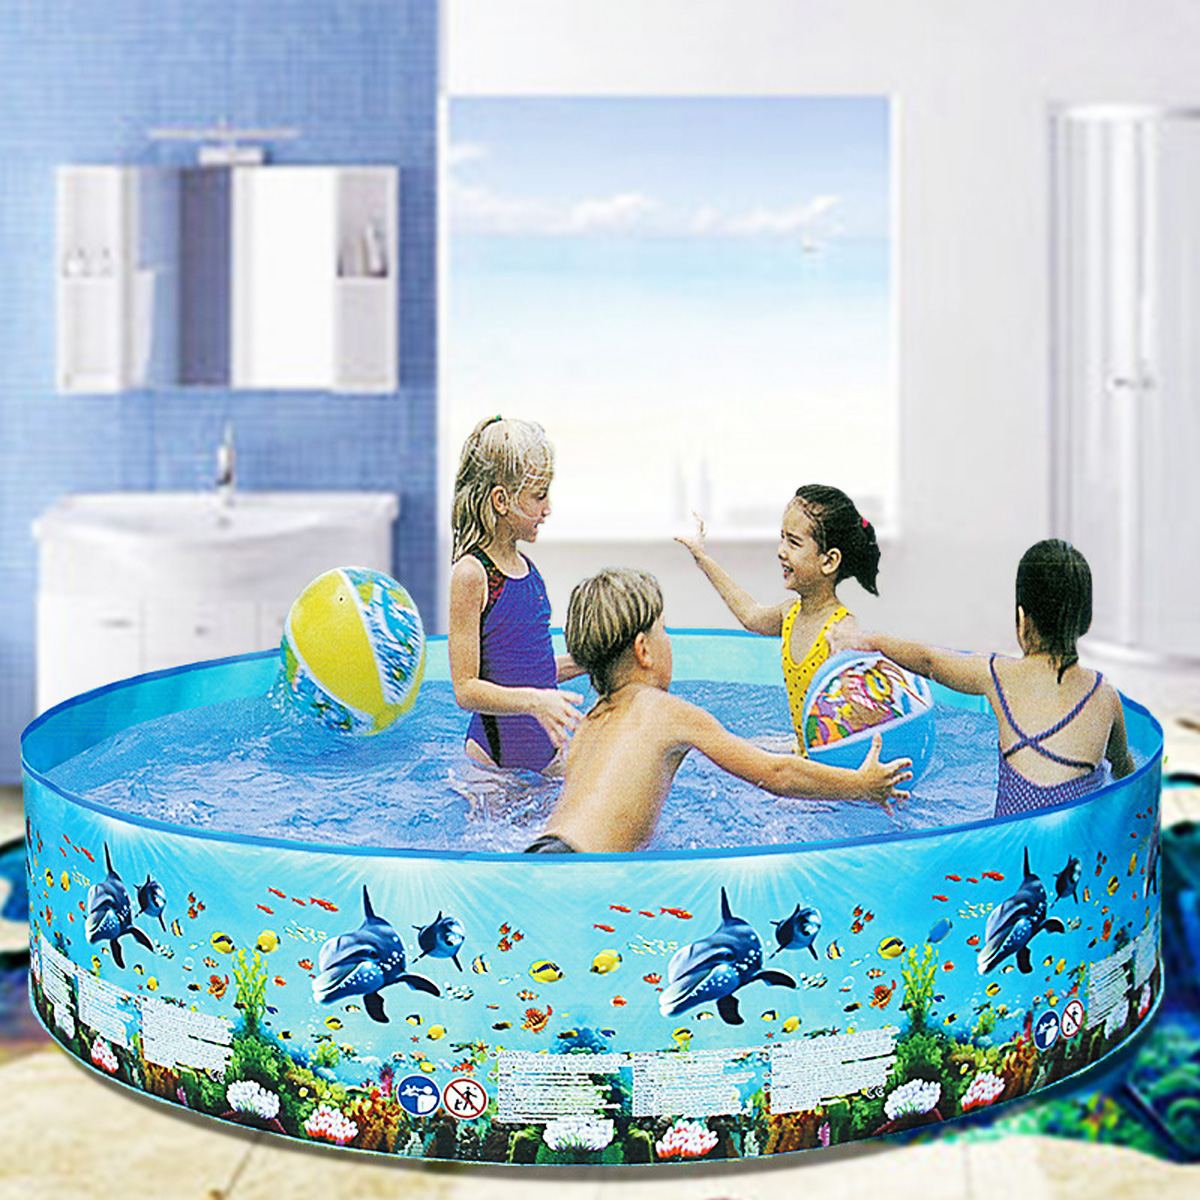 183244x38cm-No-Need-Inflatable-Swimming-Pool-Summer-Holiday-Children-Paddling-Pools-Beach-Family-Gam-1675411-5